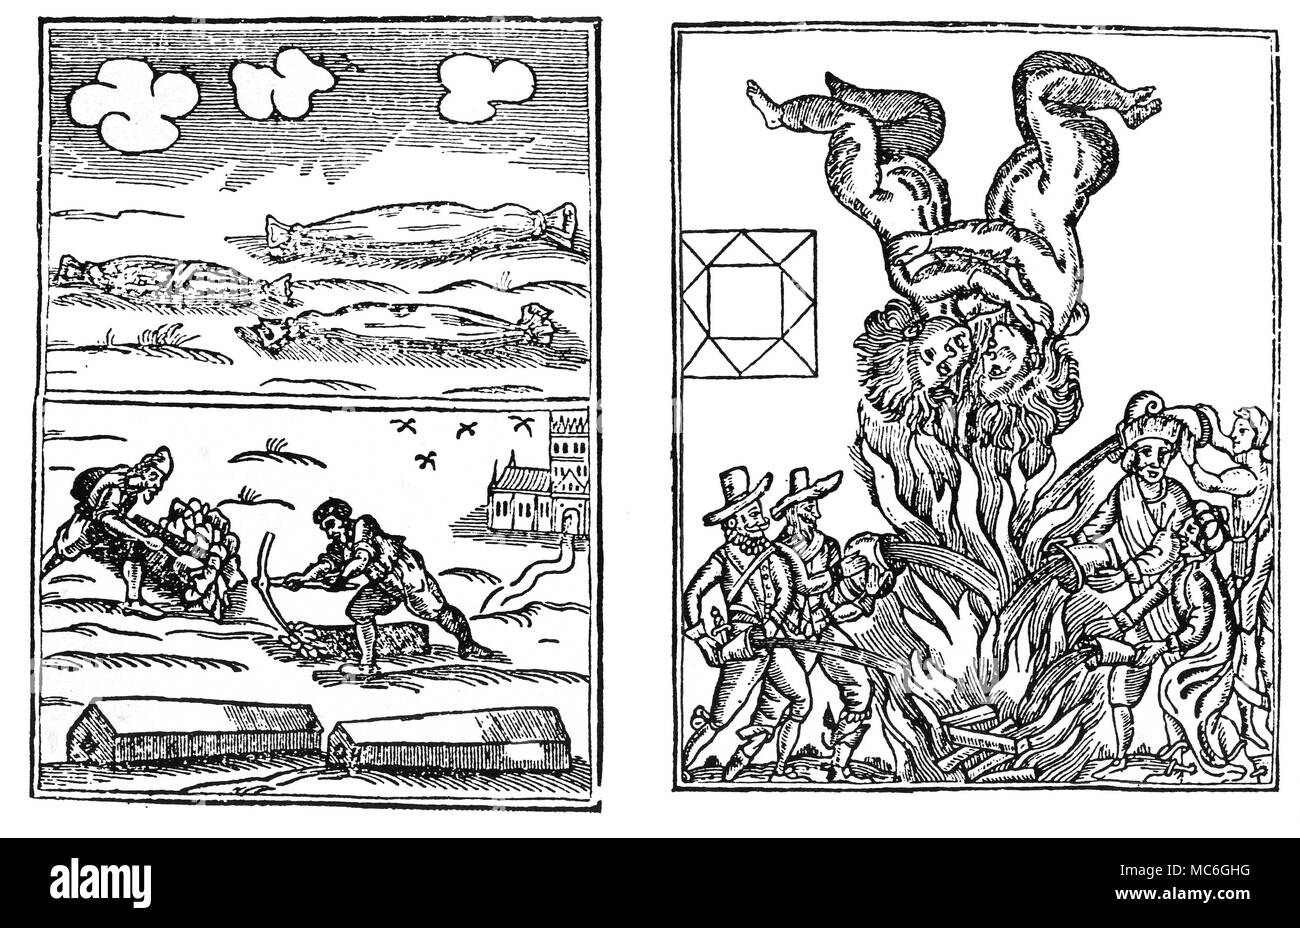 ASTROLOGY - HIEROGLYPHICS Two 'hieroglyphics', or aenigmatic plates, published by the English astrologer, William Lilly, circa 1651. The image to the left was taken as a prediction of the Great Plague of 1665. The image to the right was taken as a prediction of the Great Fire, which destroyed much of London in 1666. The link with London is clearly set out in astrological terms, for the twins hovering over the fire represent Gemini - the zodiac sign that rules London. From Richard A. Proctor, Myths and Marvels of Astronomy, 1889. Stock Photo